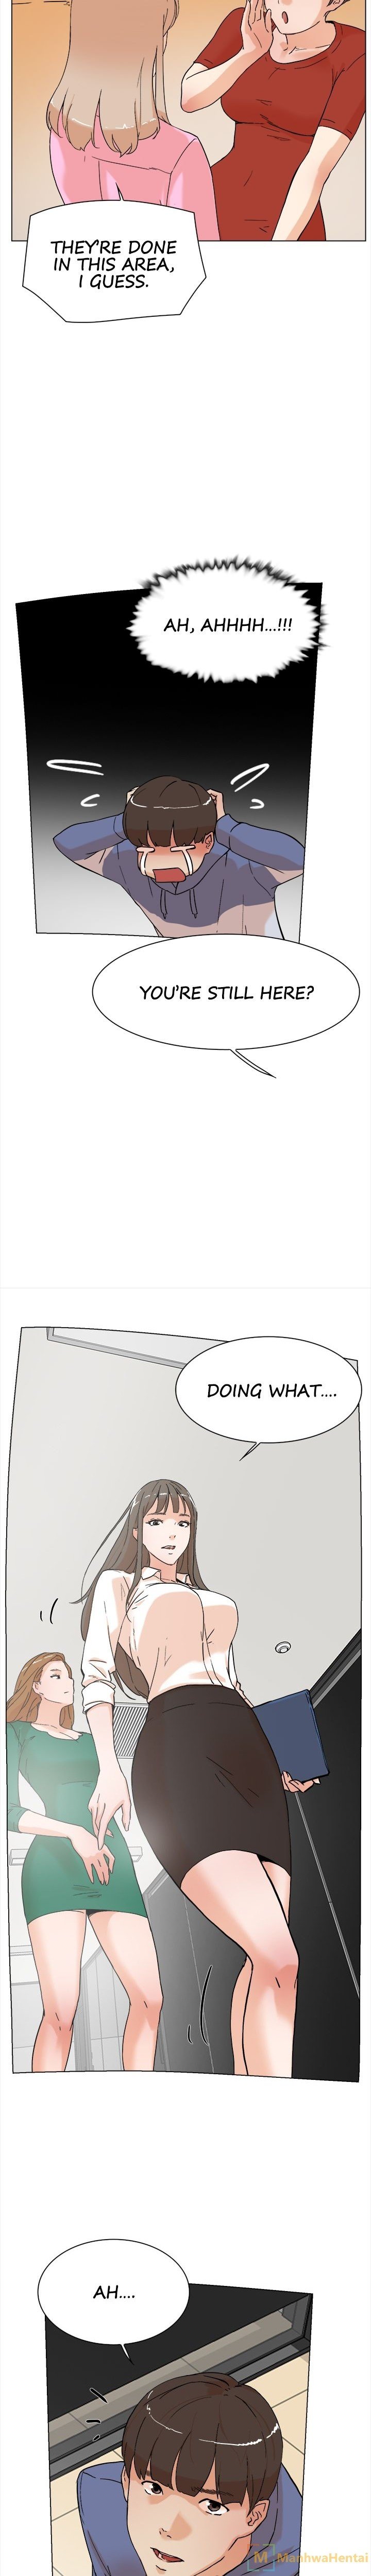 office-affairs-chap-3-15